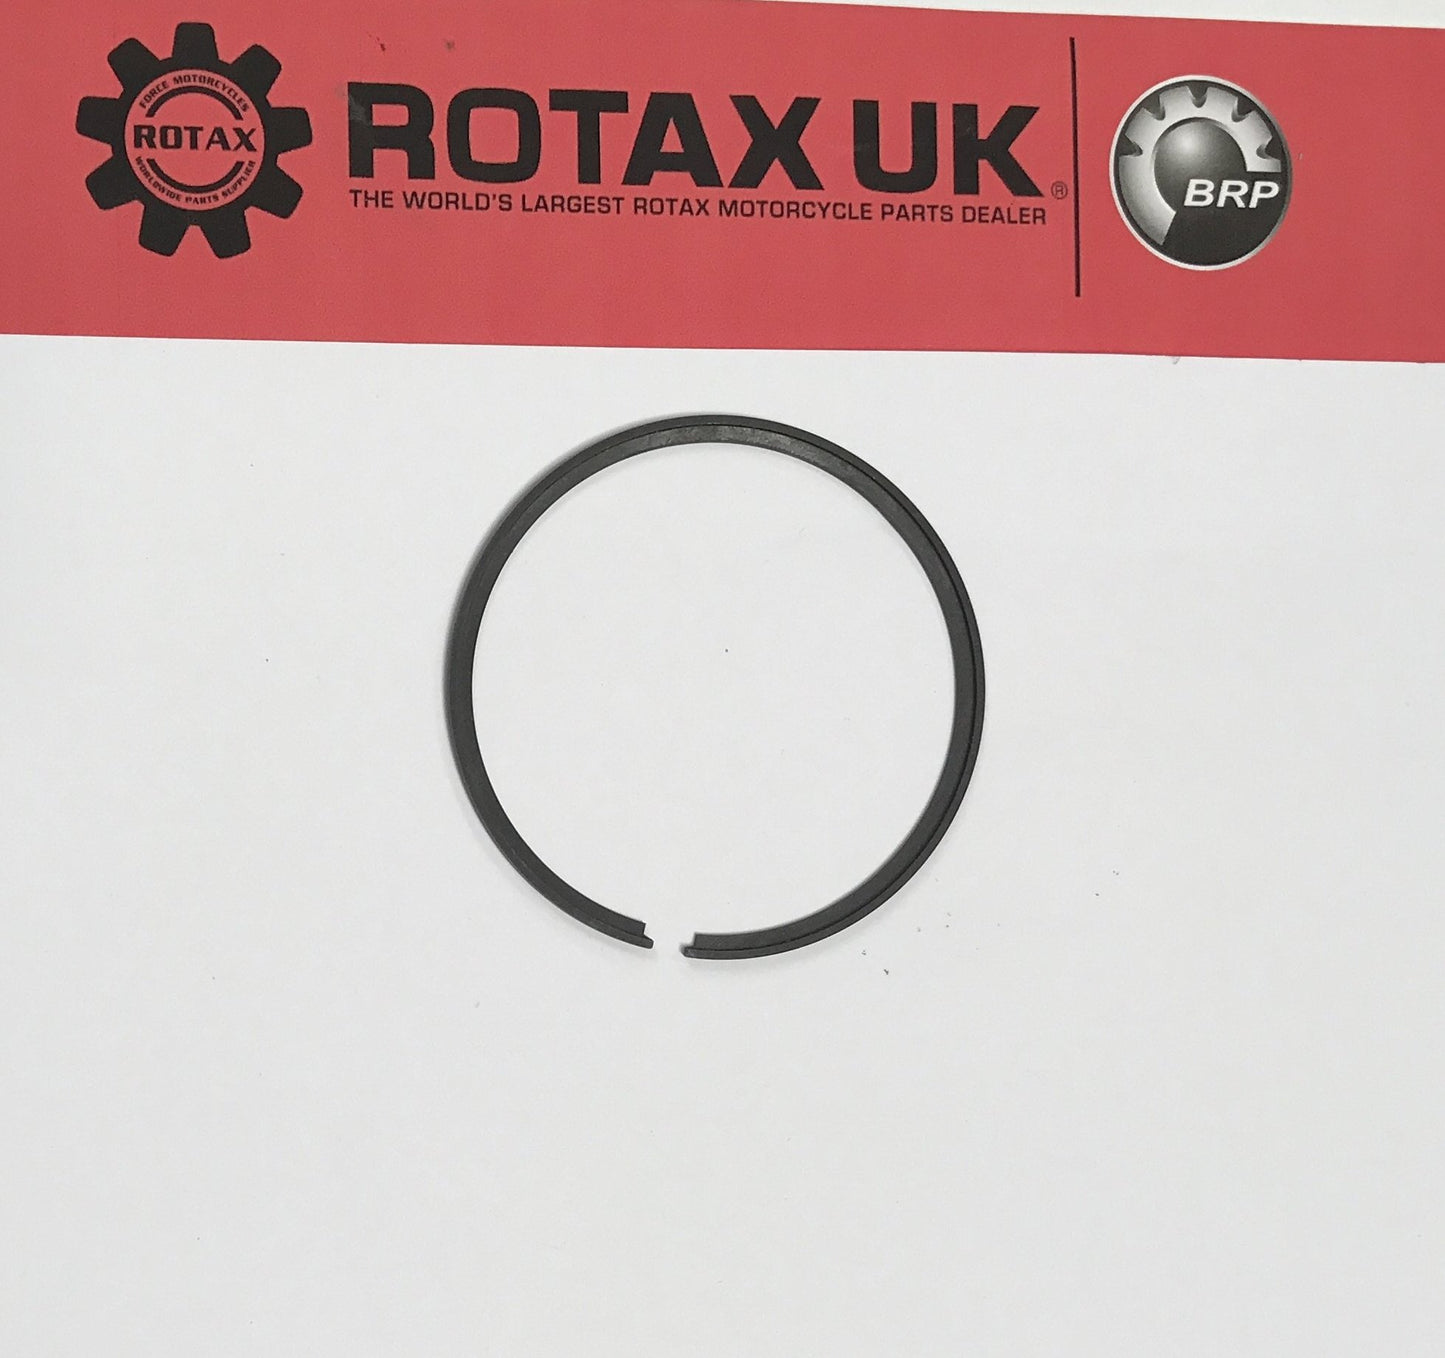 215085 - 62.00mm Piston Ring for various engine types rotax